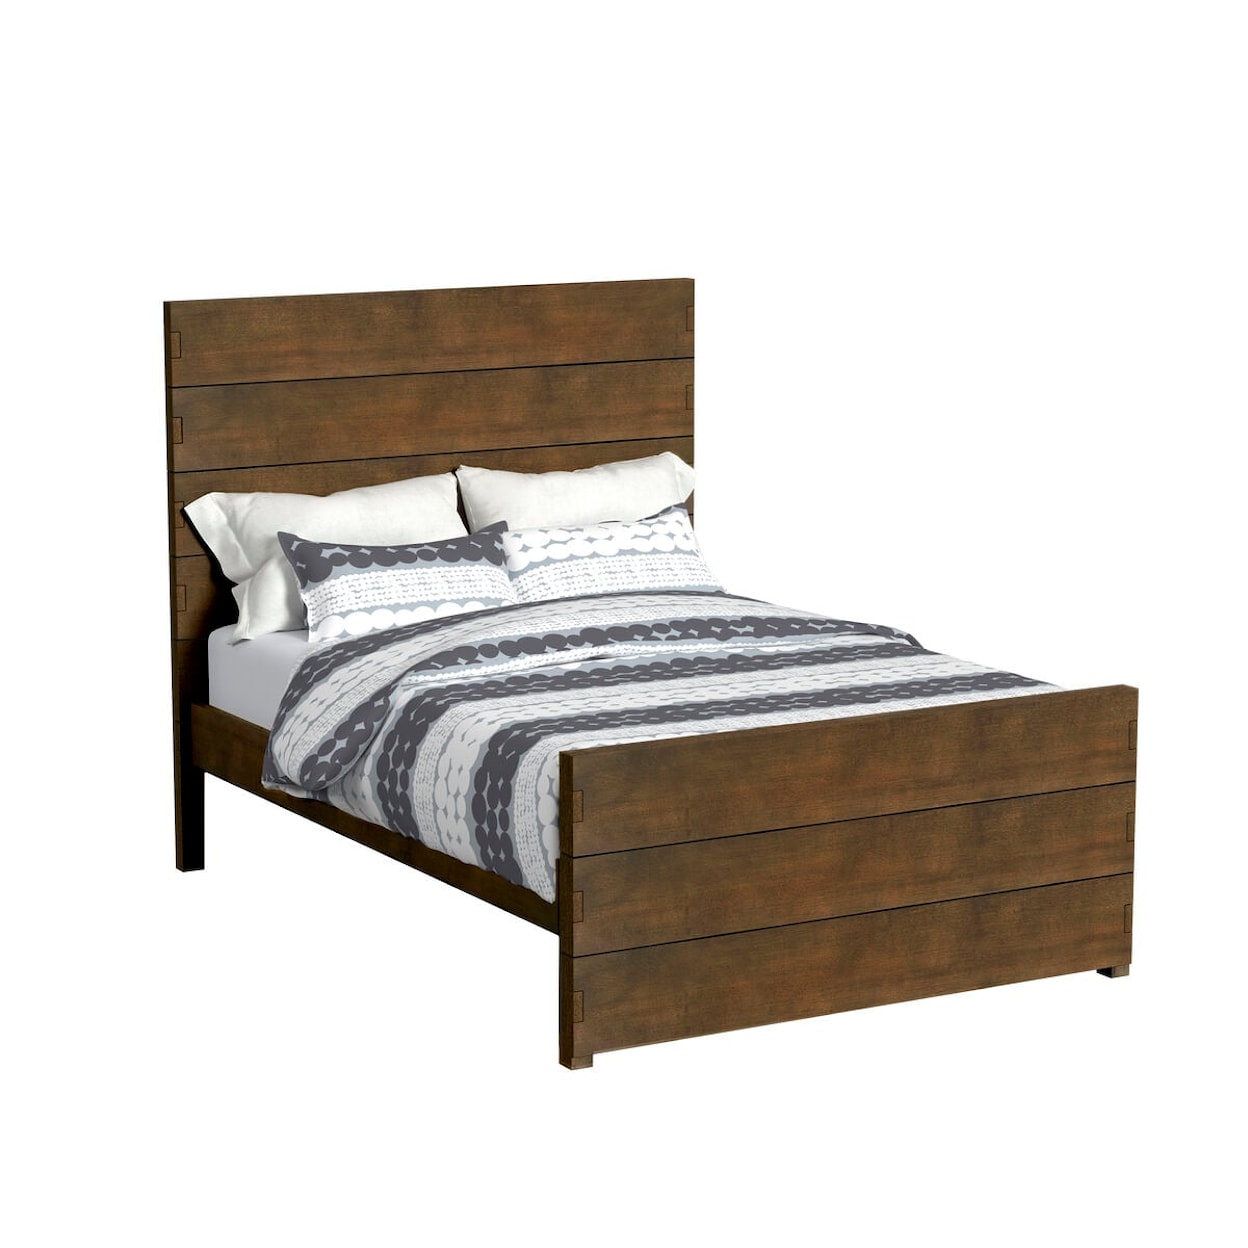 Westwood Design Dovetail Full Bed